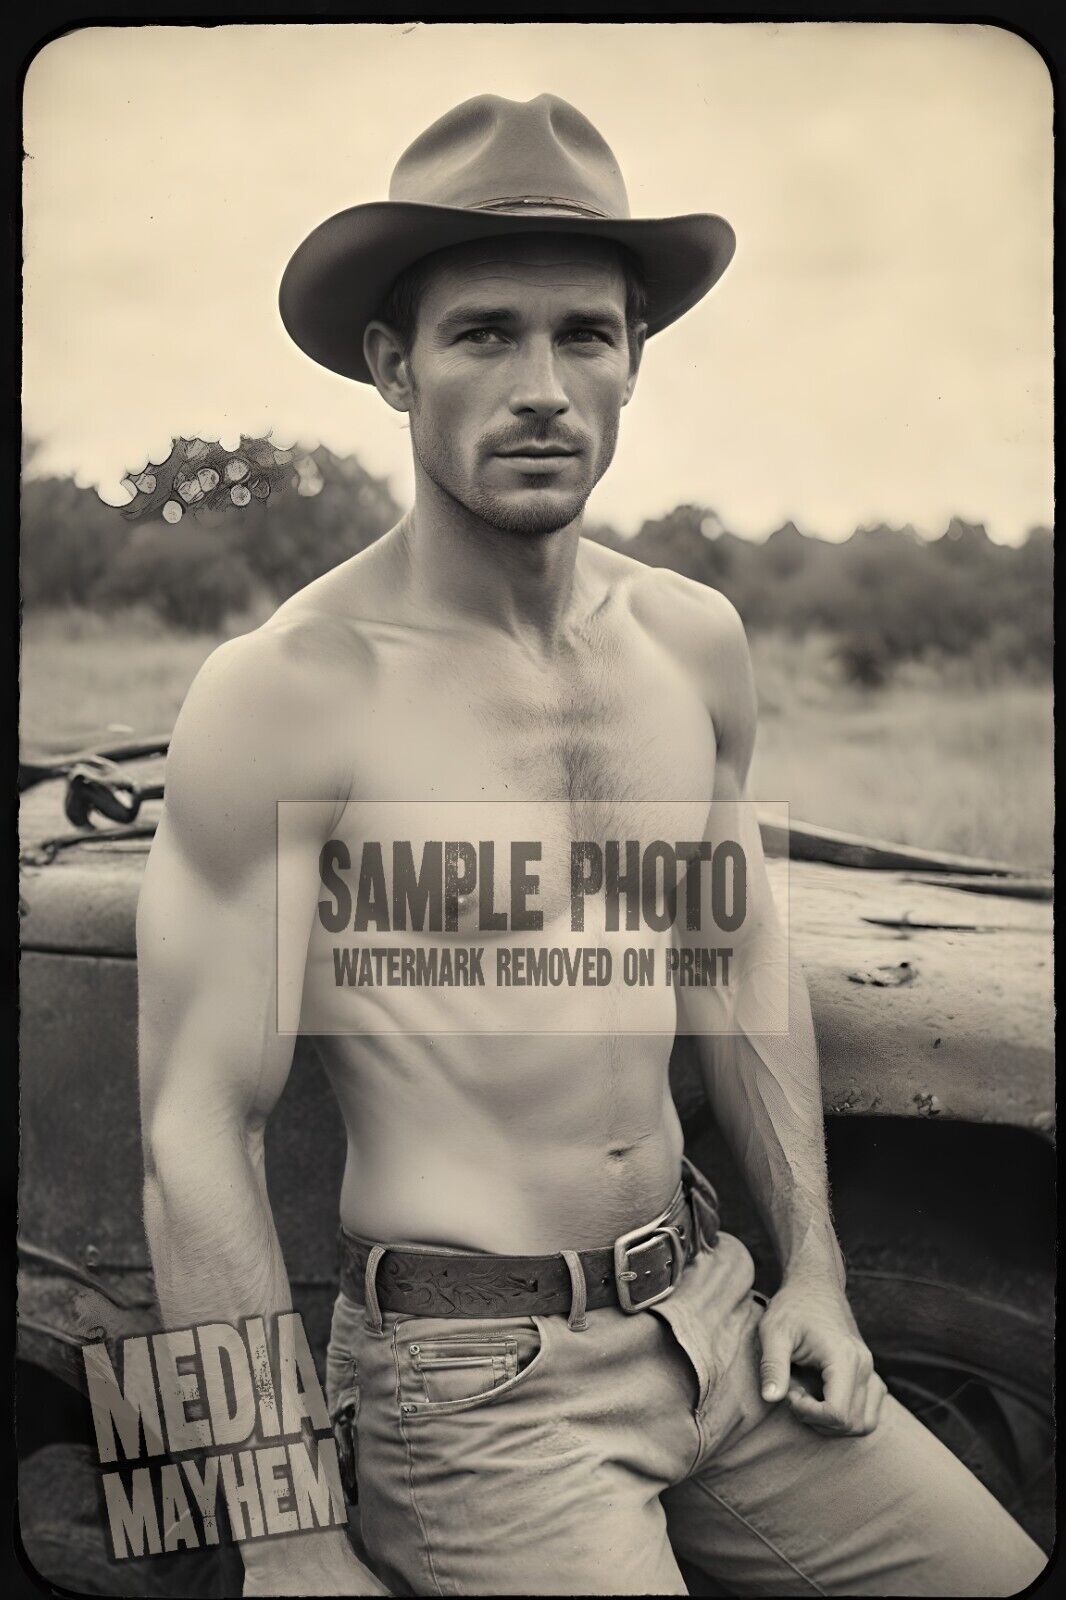 Man with Abs Cowboy Posing in front junk car Sexy 4x6 Gay Interest Photo #142